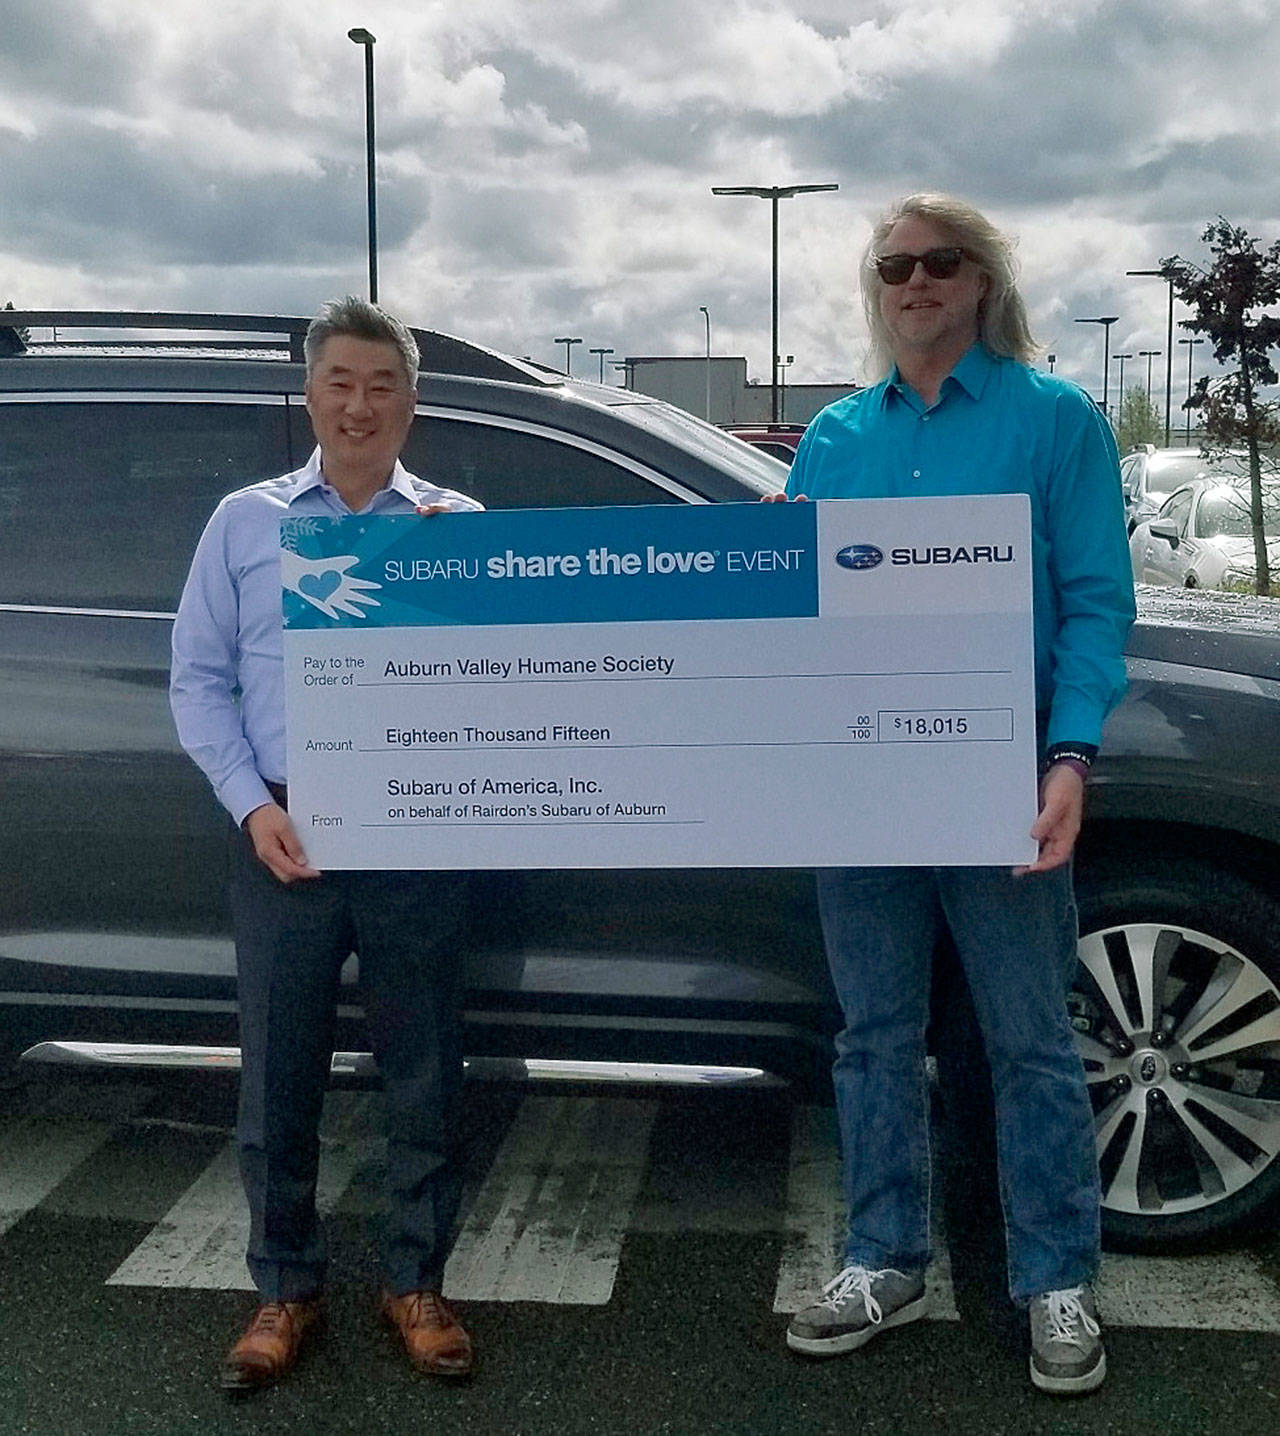 Jay Lee, general manager of Rairdon’s Subaru of Auburn, left, presents a check of more than $18,000 to Phil Morgan, president and CEO of the Auburn Valley Humane Society. COURTESY PHOTO